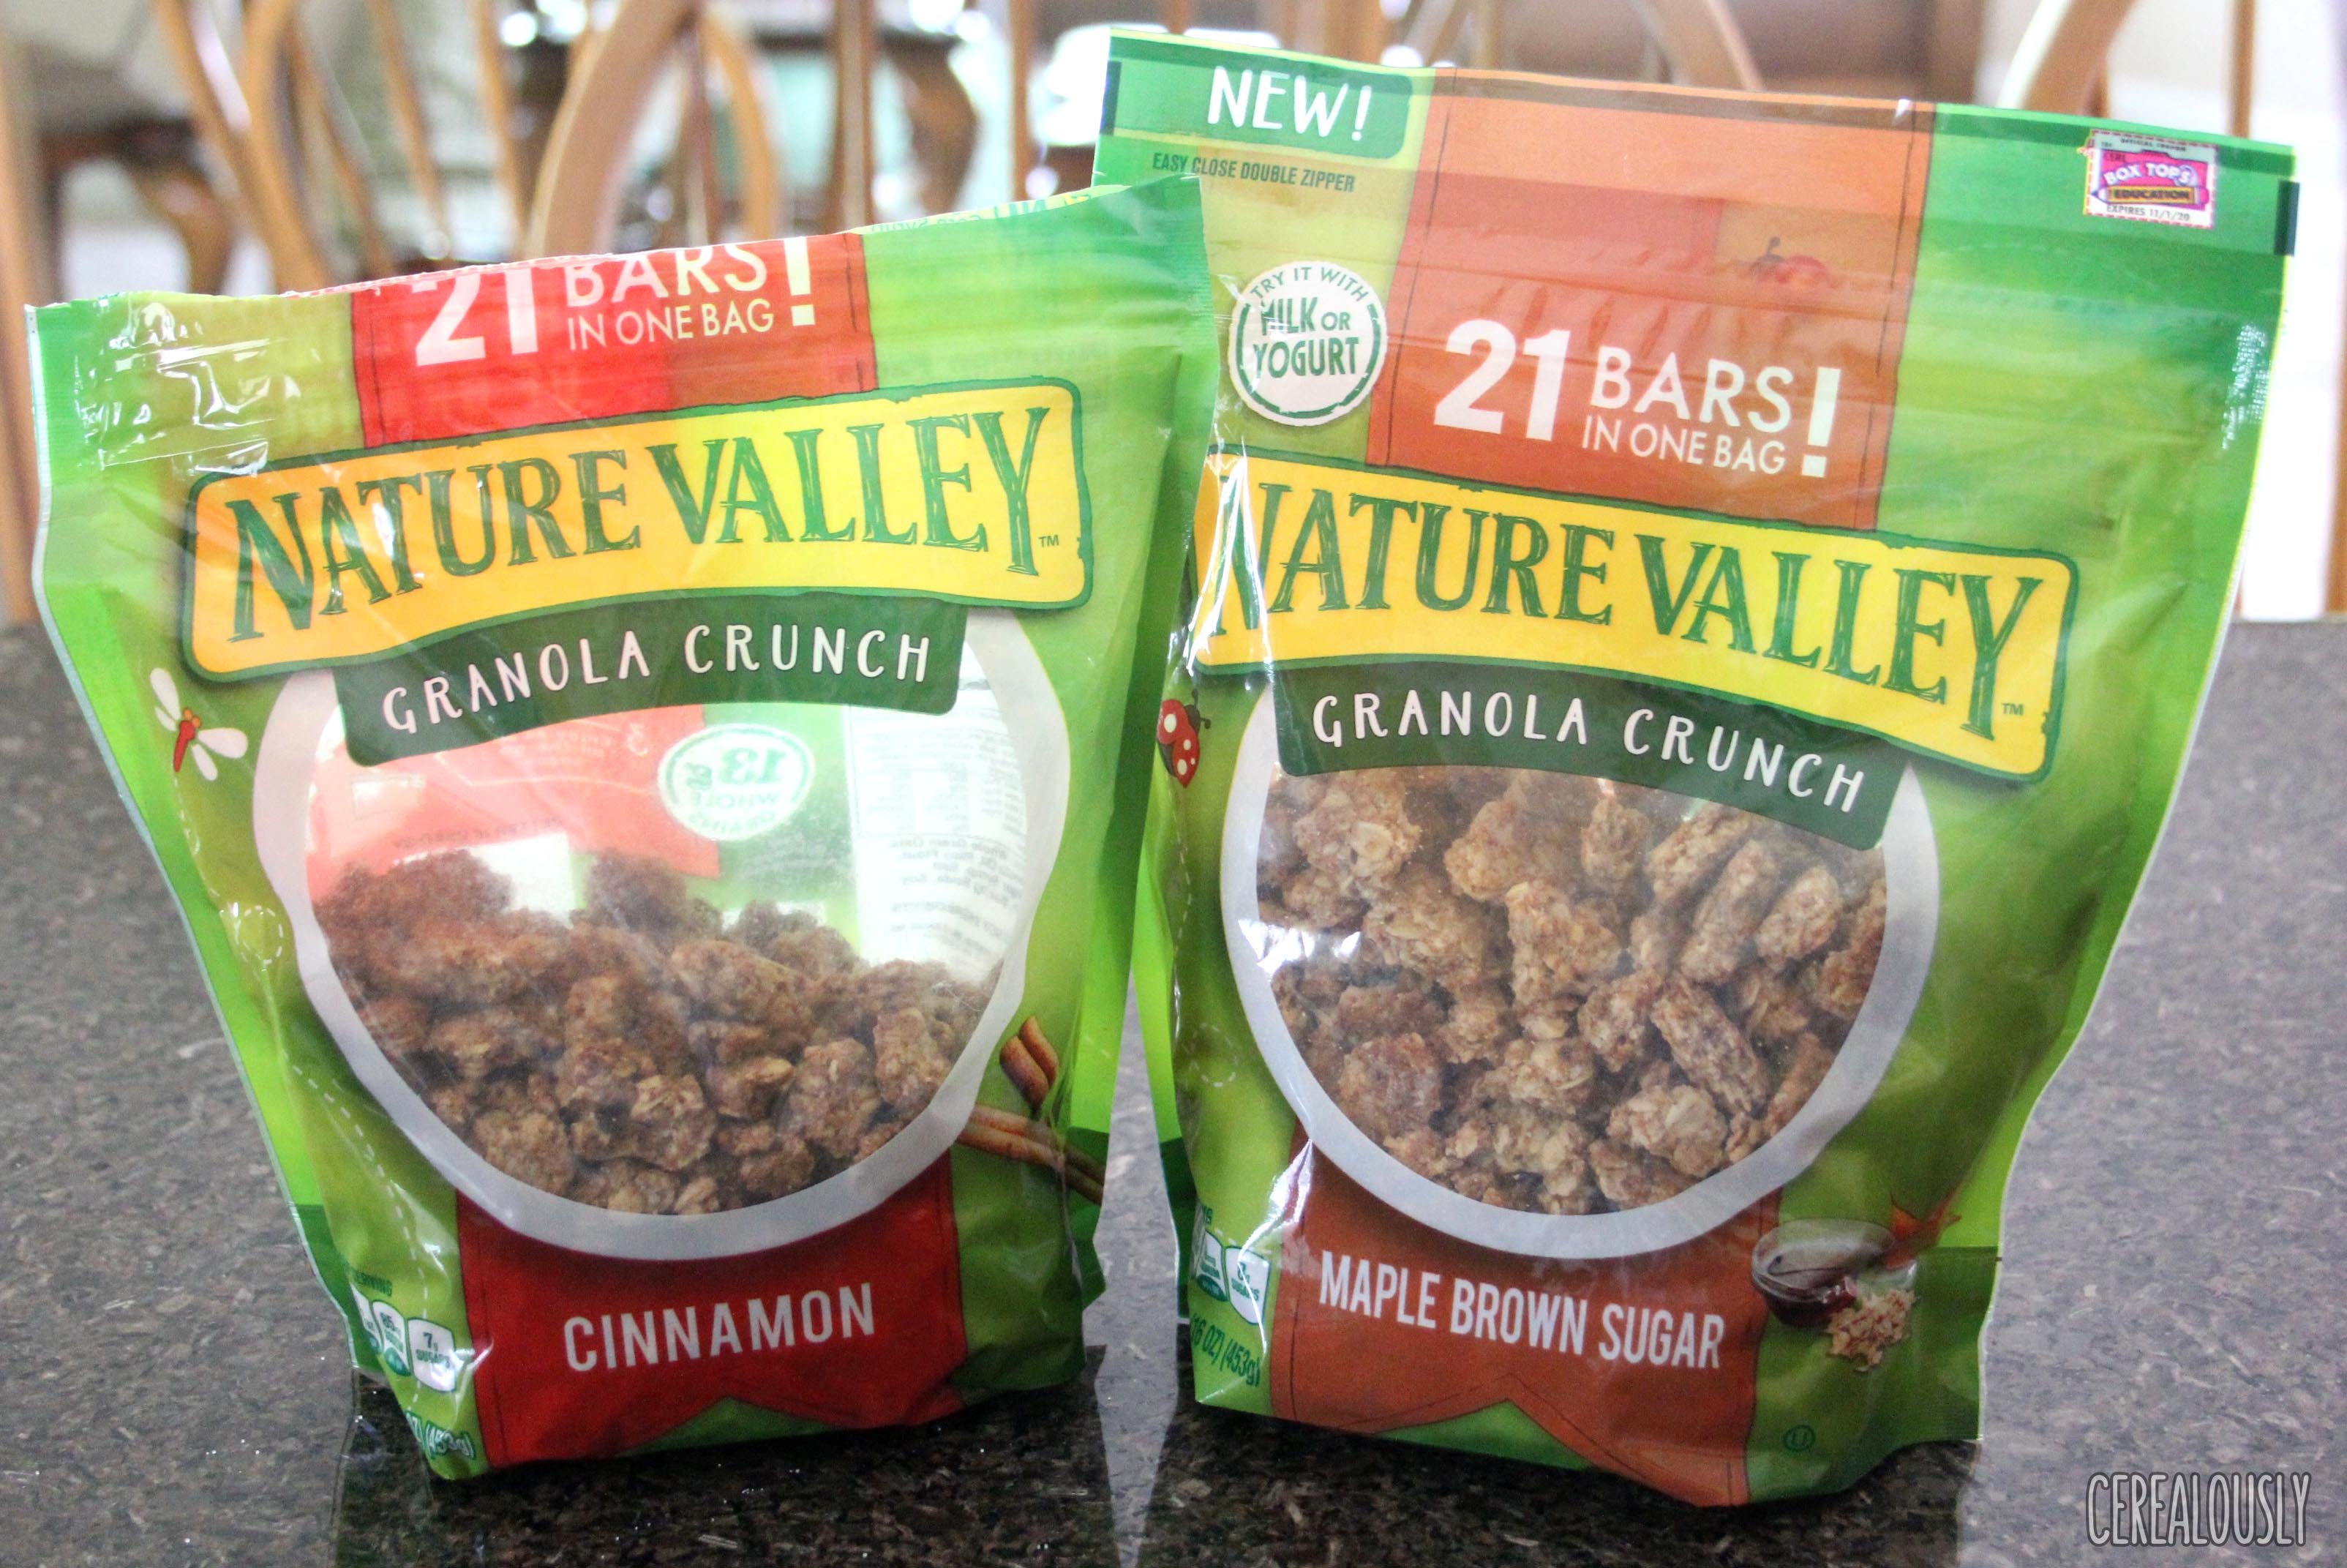 How much sugar is in a nature valley granola bar Review Nature Valley Granola Crunch Cinnamon Maple Brown Sugar